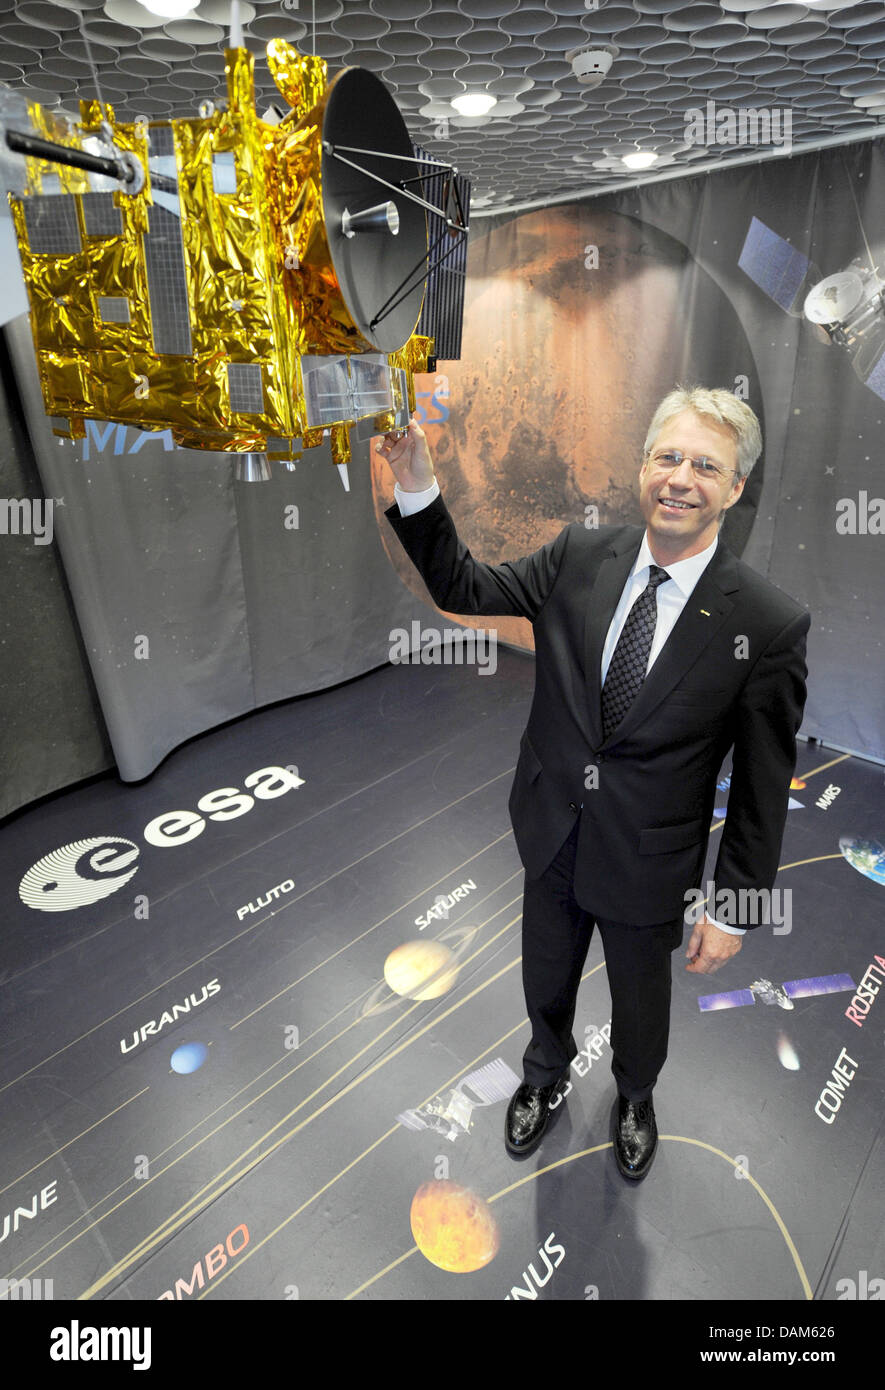 Thomas Reiter, the new director for manned spaceflight and mission operations of the European Space Agency (ESA) is pictured with a model of the space probe 'Mars Express' at the Control Centre ESOC of ESA in Darmstadt, Germany, 25 May 2011. The 52-year-old is responsible for the education and training of European astronauts, as well as Europe's contribition to the International Sp Stock Photo